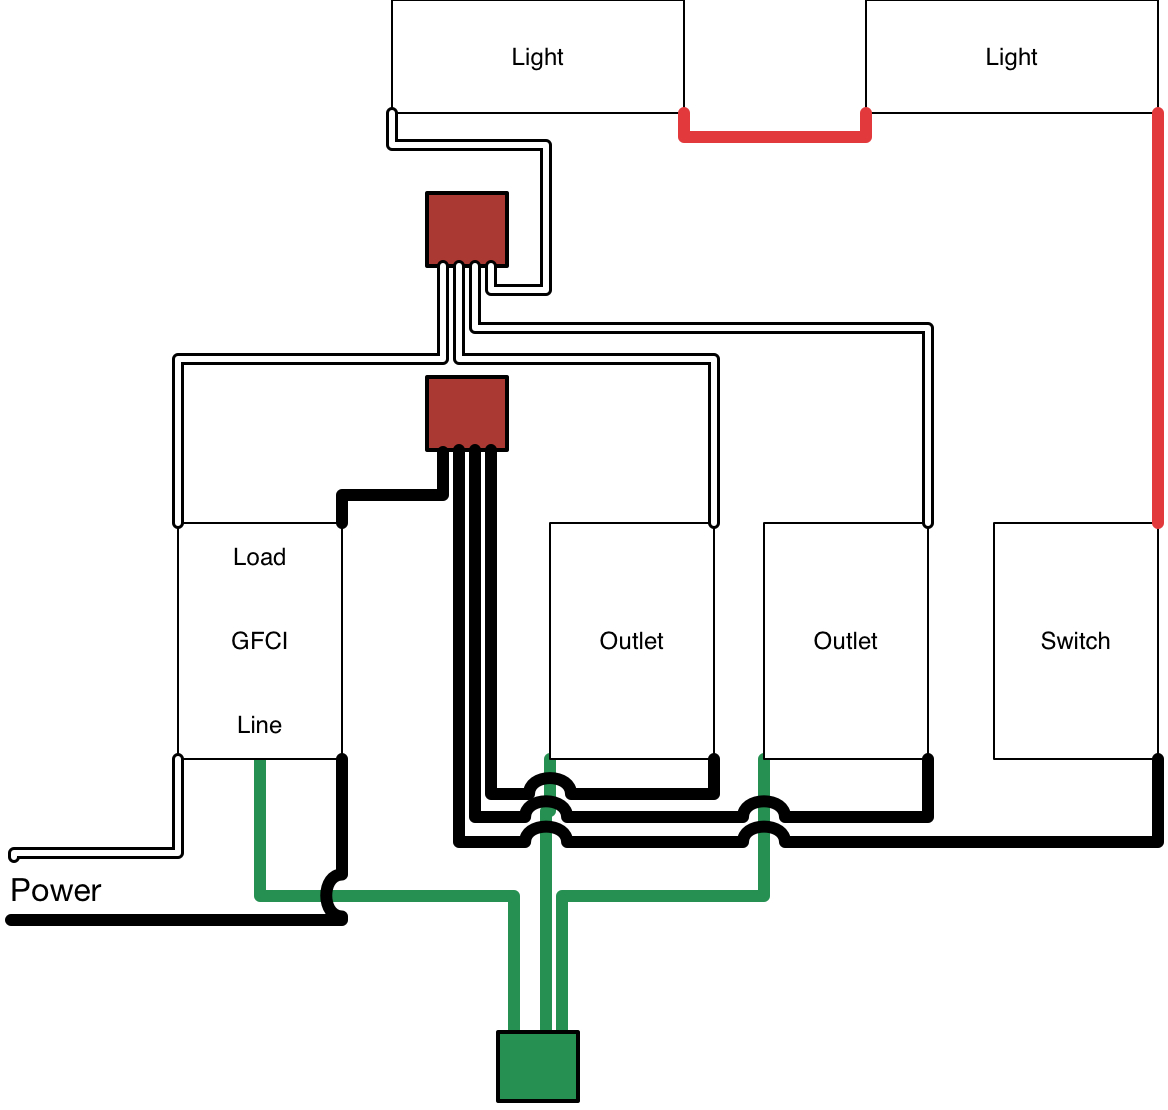 2Wire Gfci Wiring Diagram - Wiring Diagrams Thumbs - Gfci Wiring Diagram